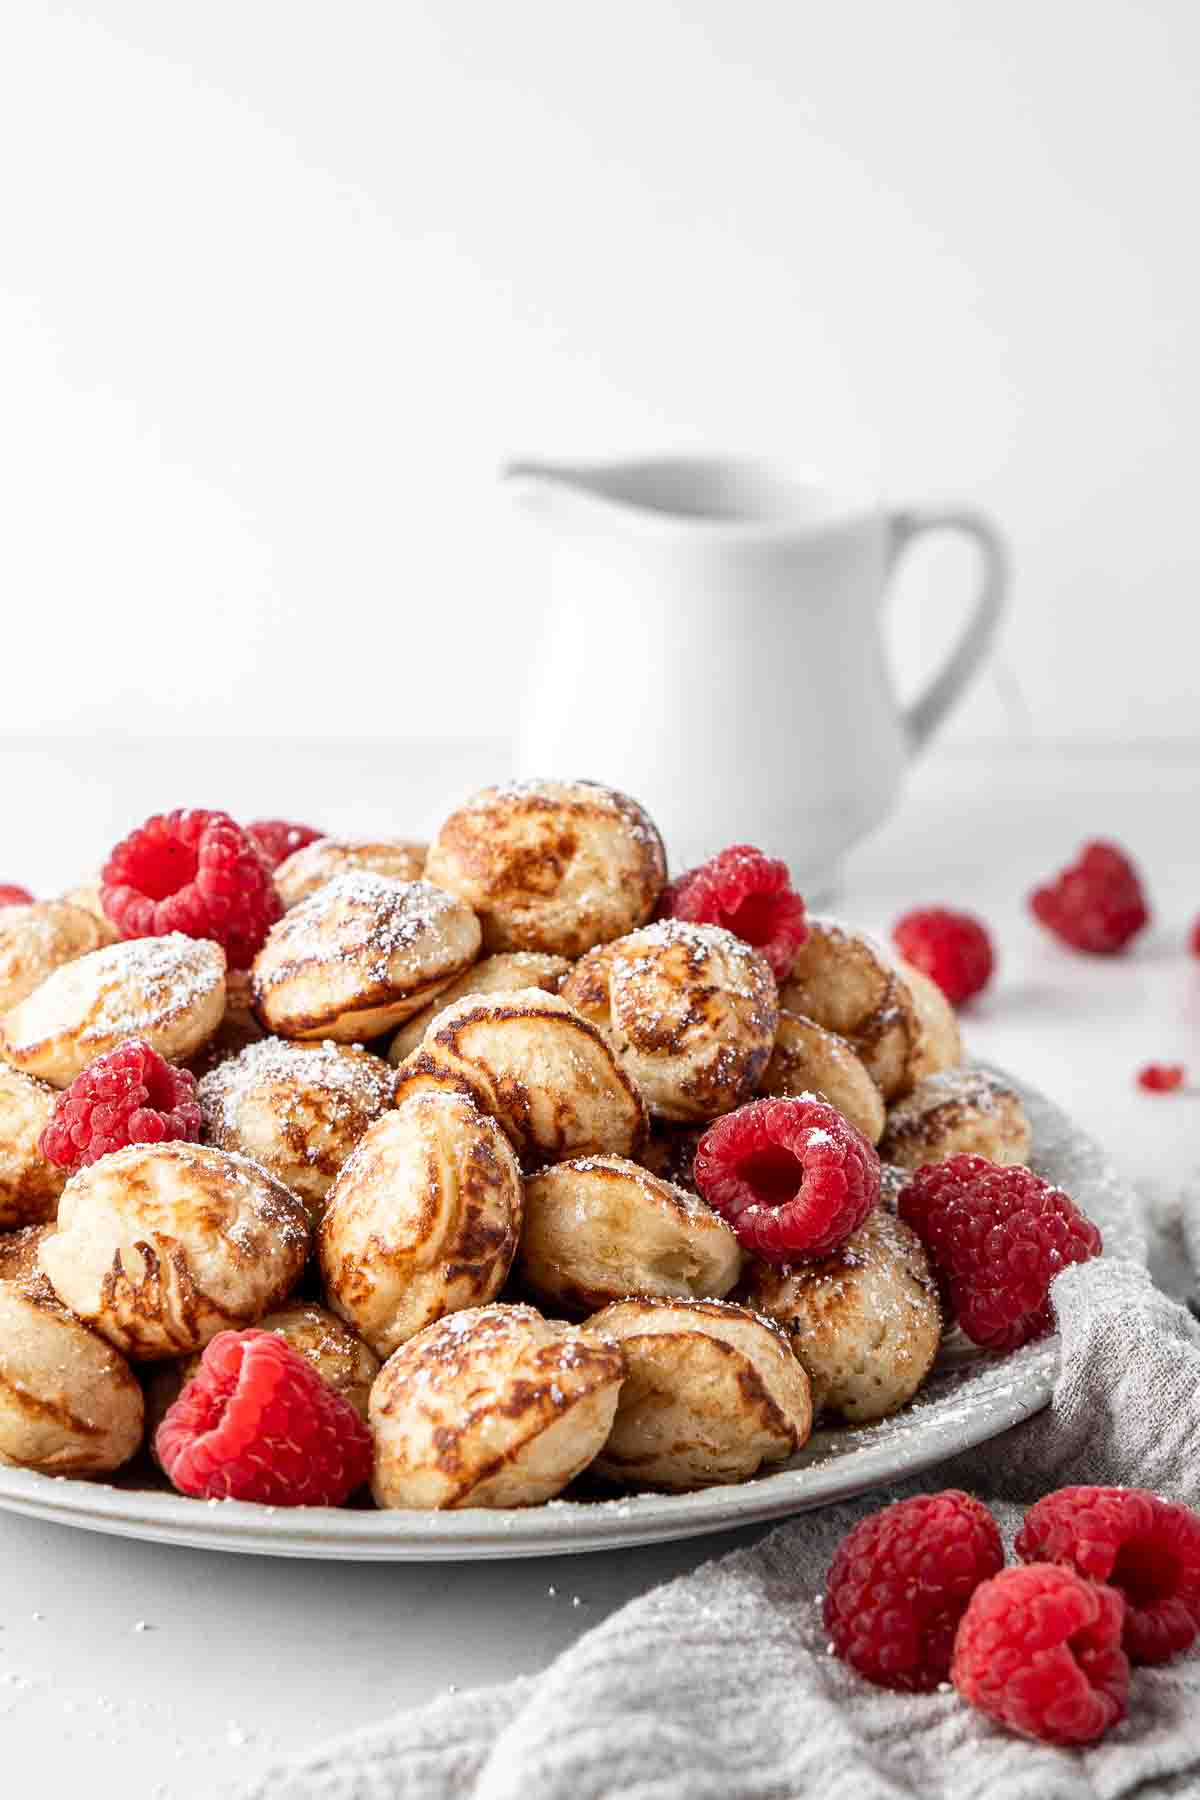 Pile of poffertjes with raspberries and icing sugar on a plate.